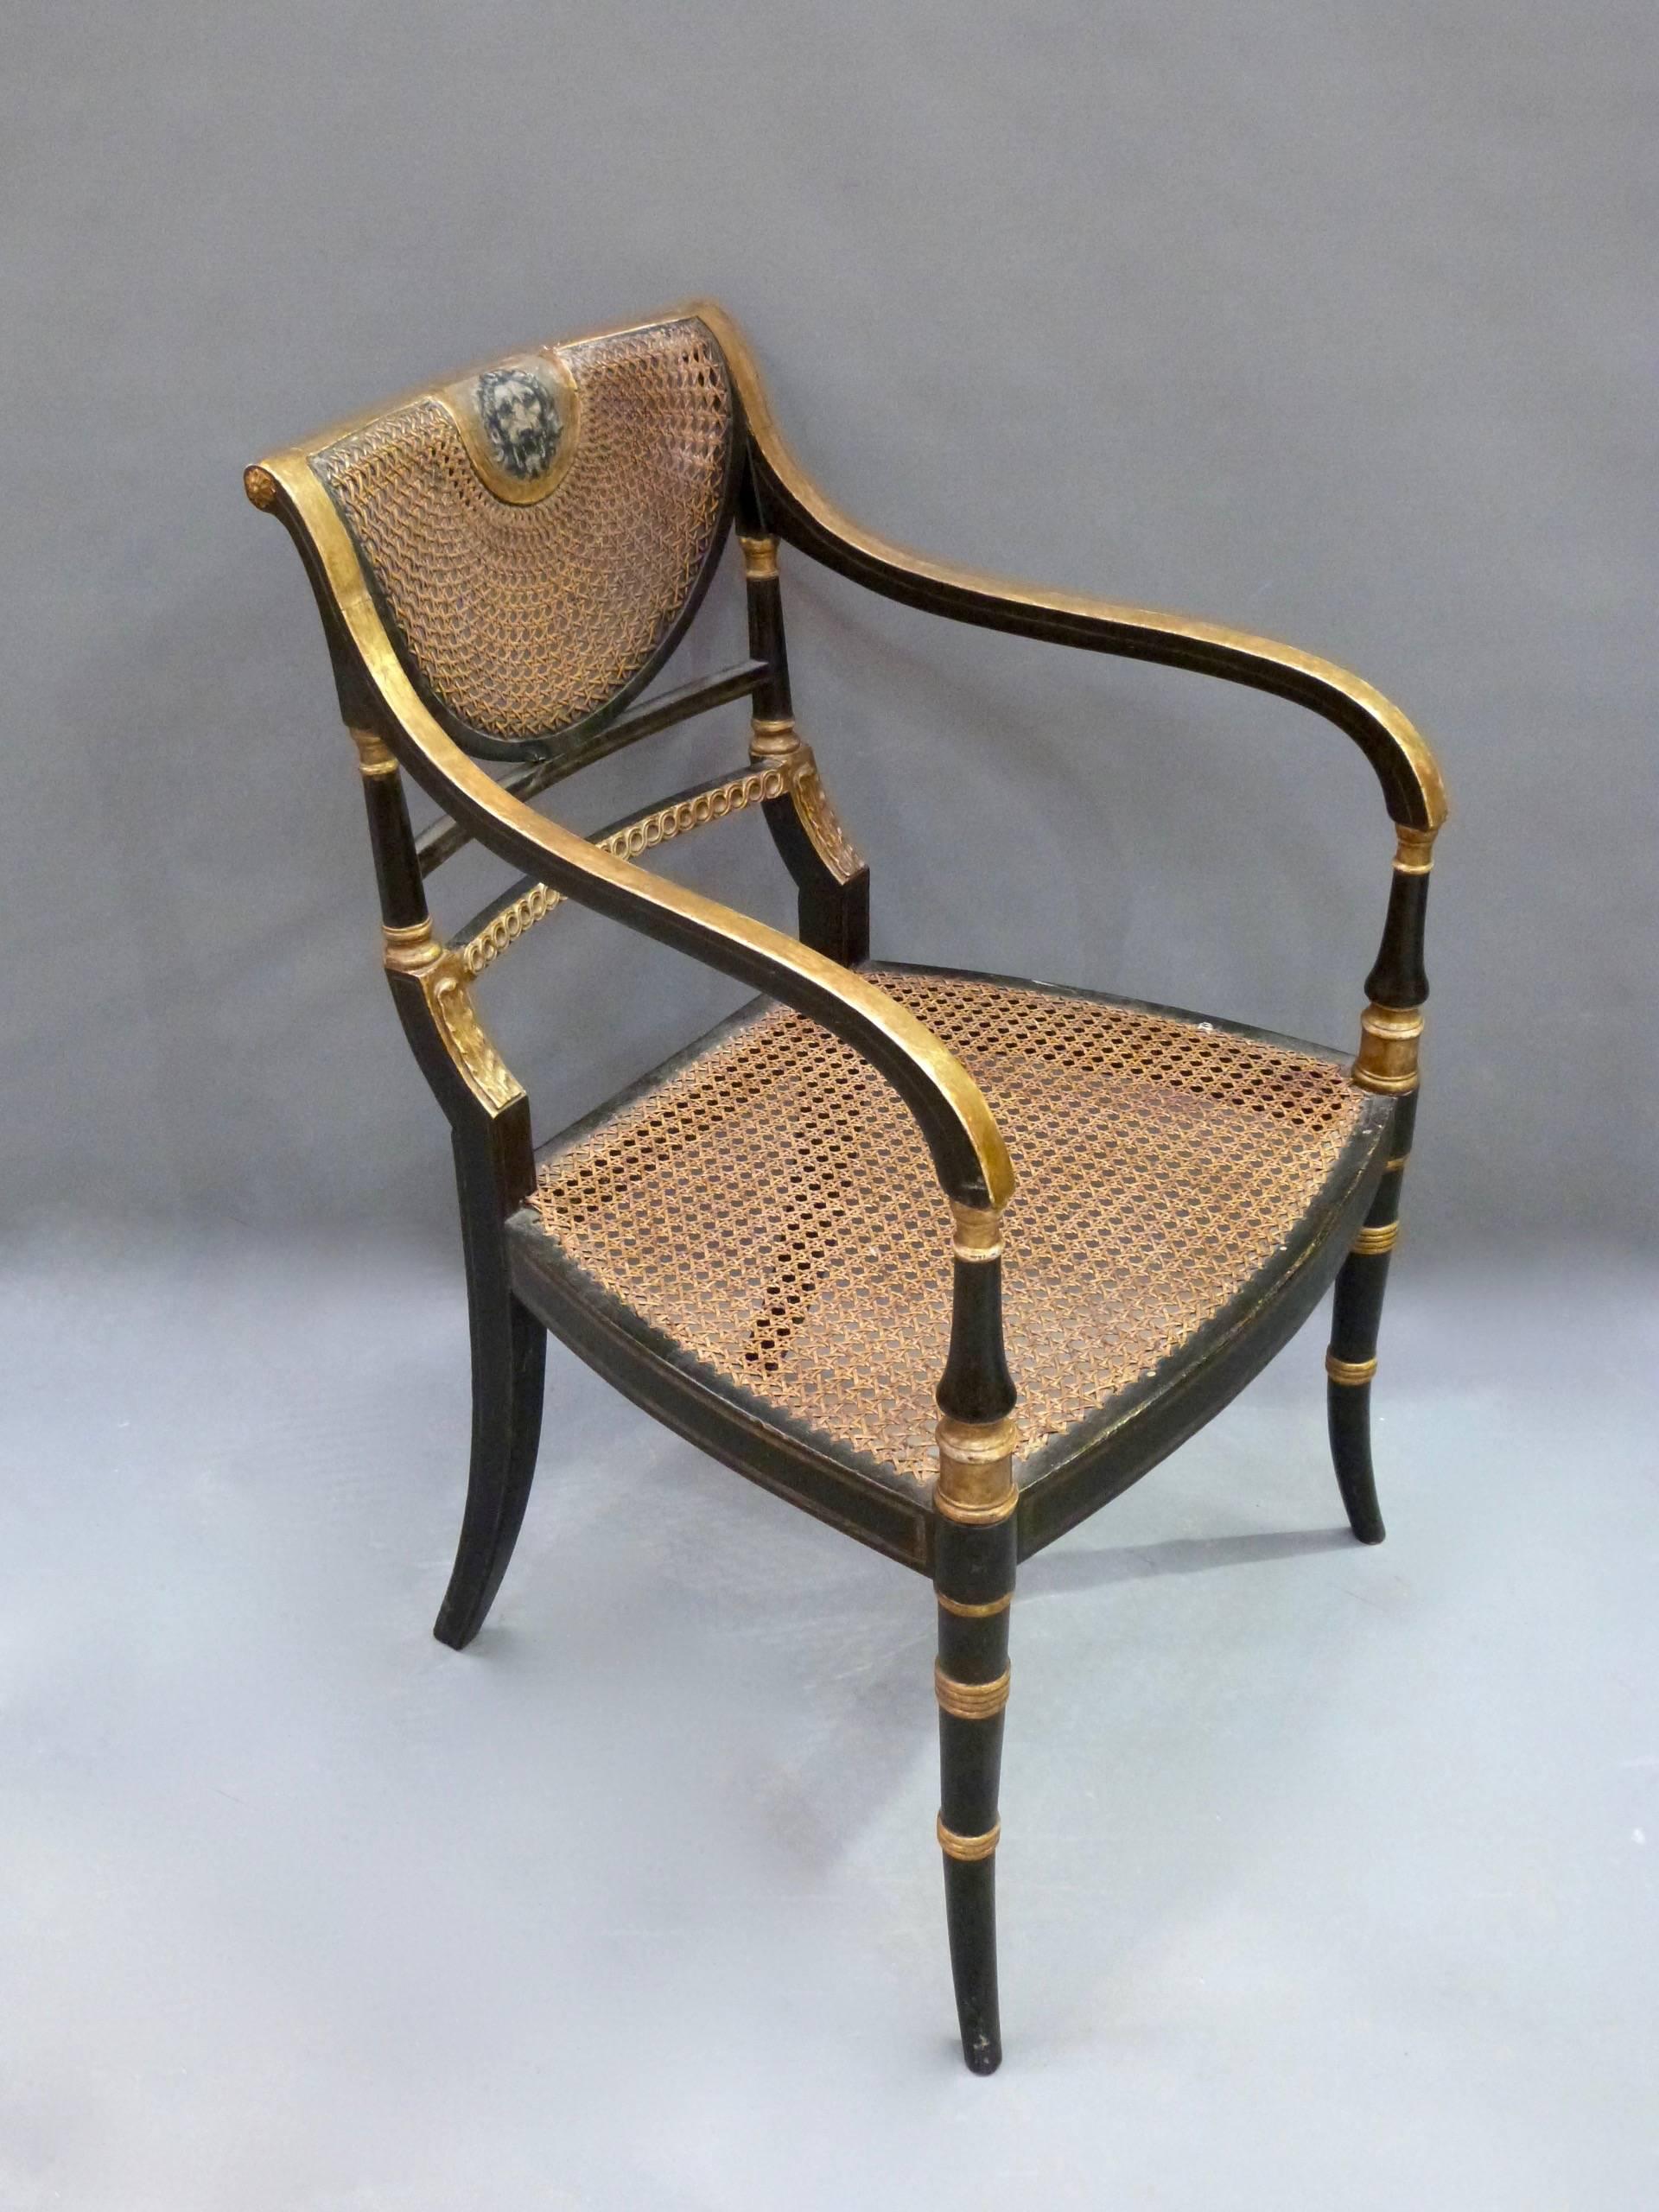 A superb pair of Regency ebonized and parcel-gilt carver chairs with Lions head painted decoration and original canning.